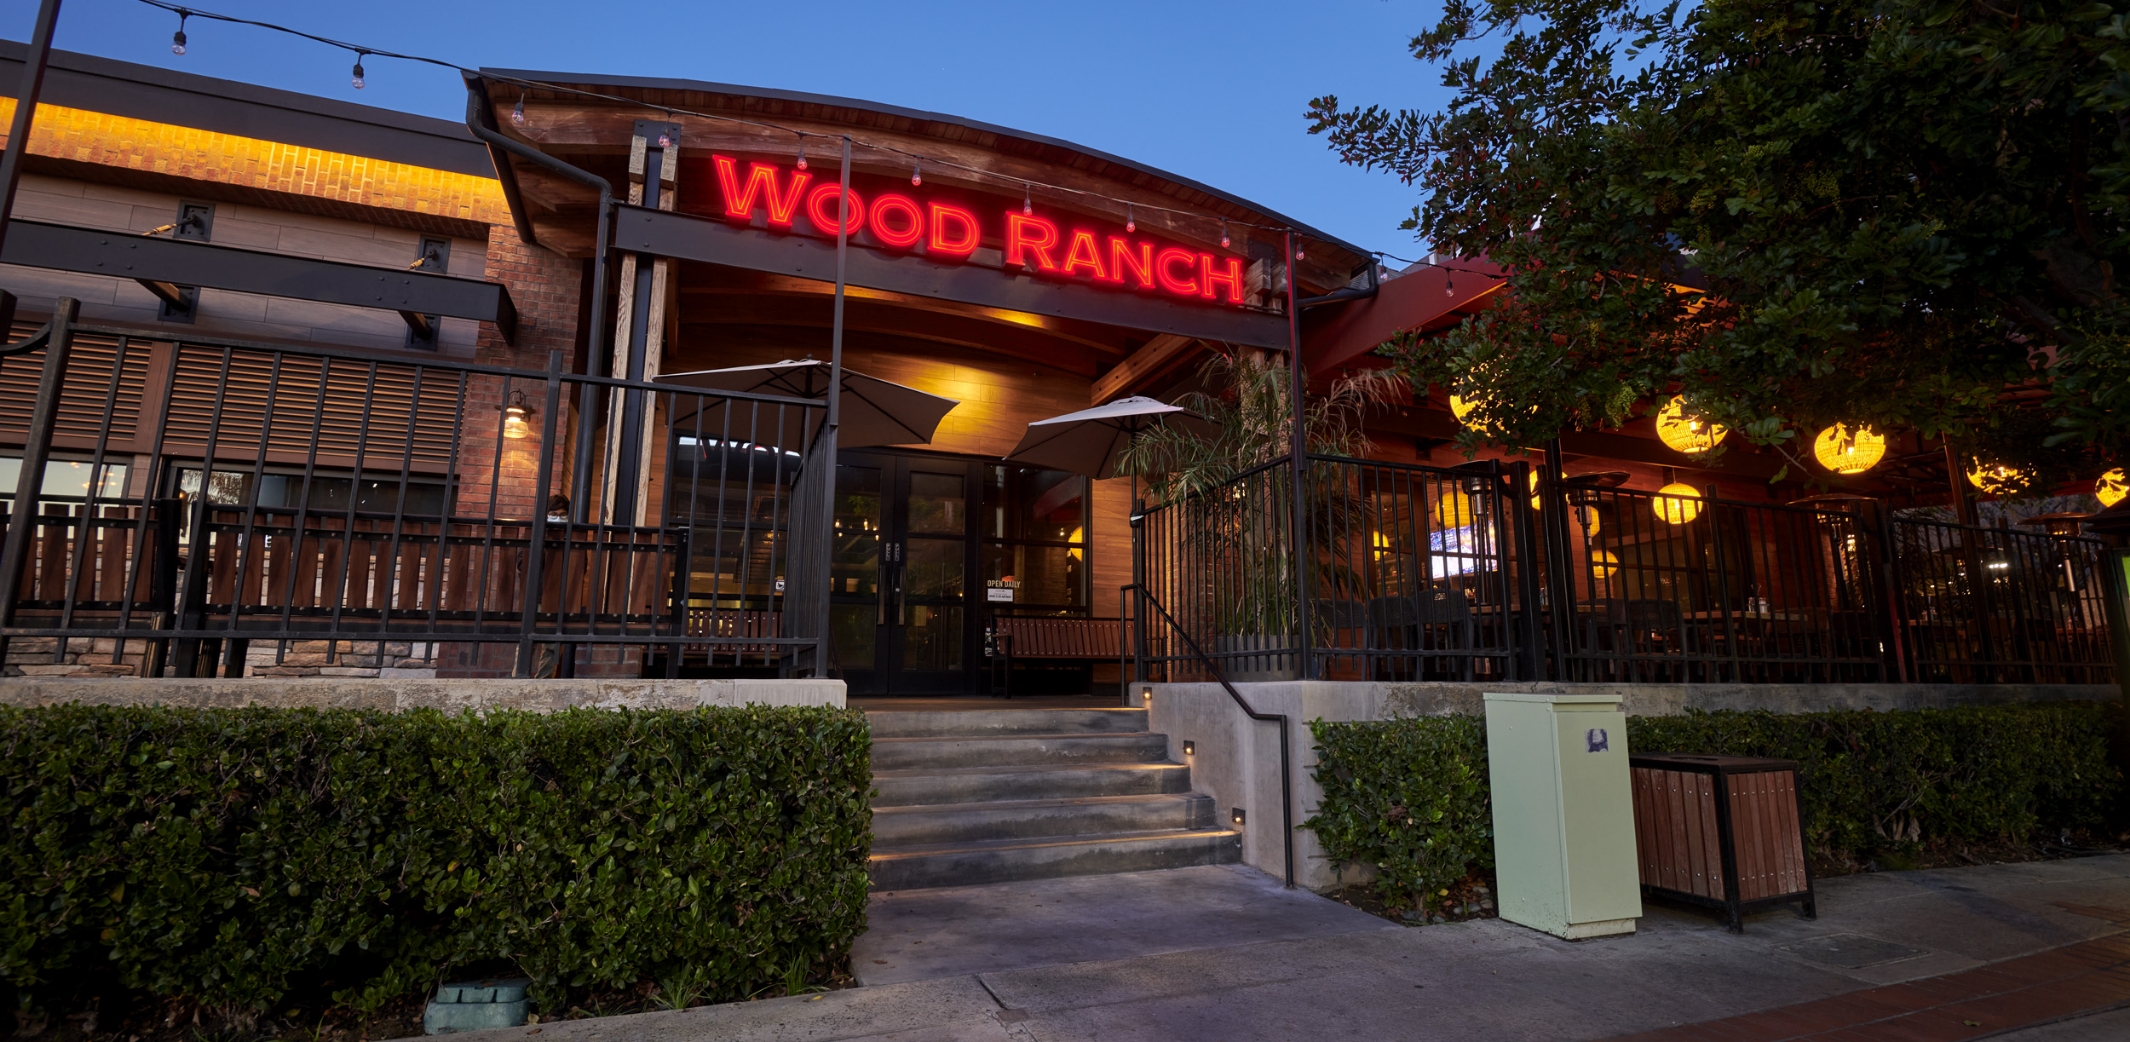 The exterior of Wood Ranch BBQ & Grill Burbank at dusk, showcasing the restaurant's illuminated sign and outdoor patio area with a cozy, welcoming ambiance.